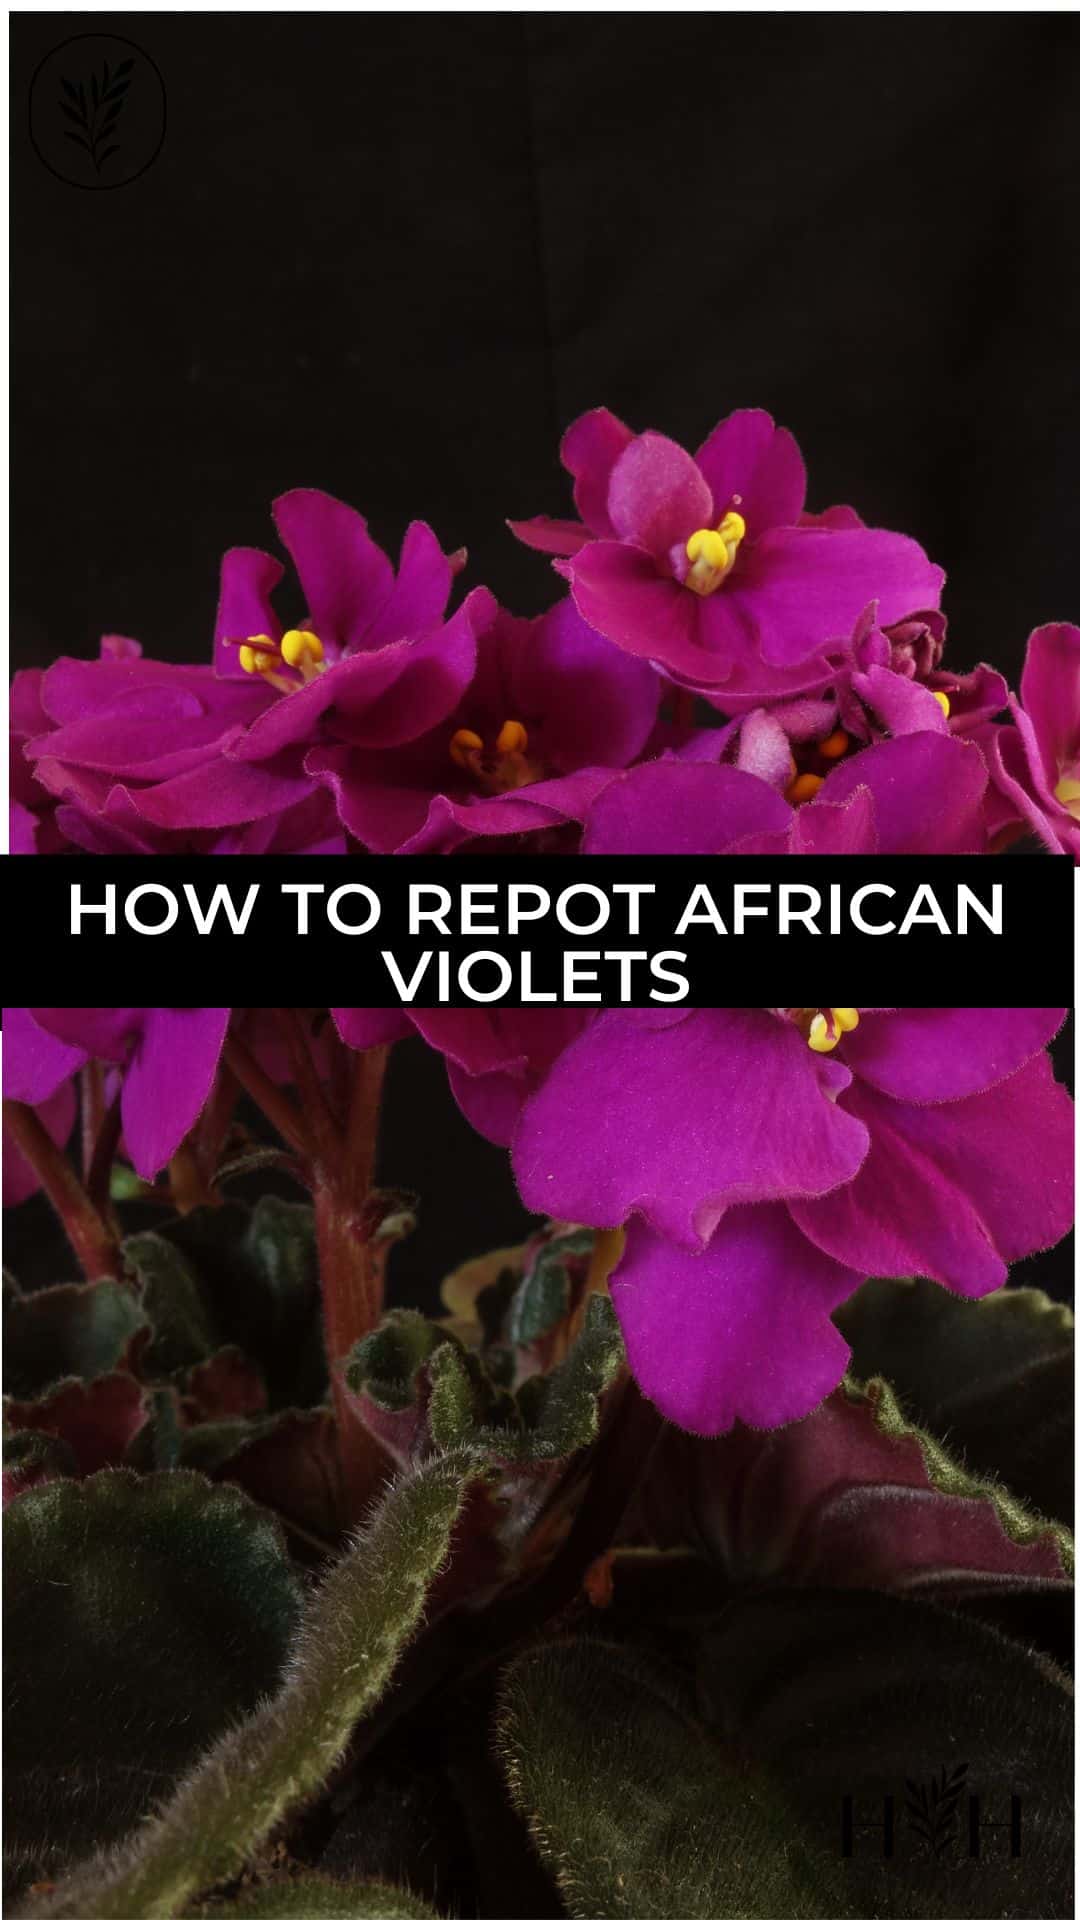 How to repot african violets via @home4theharvest